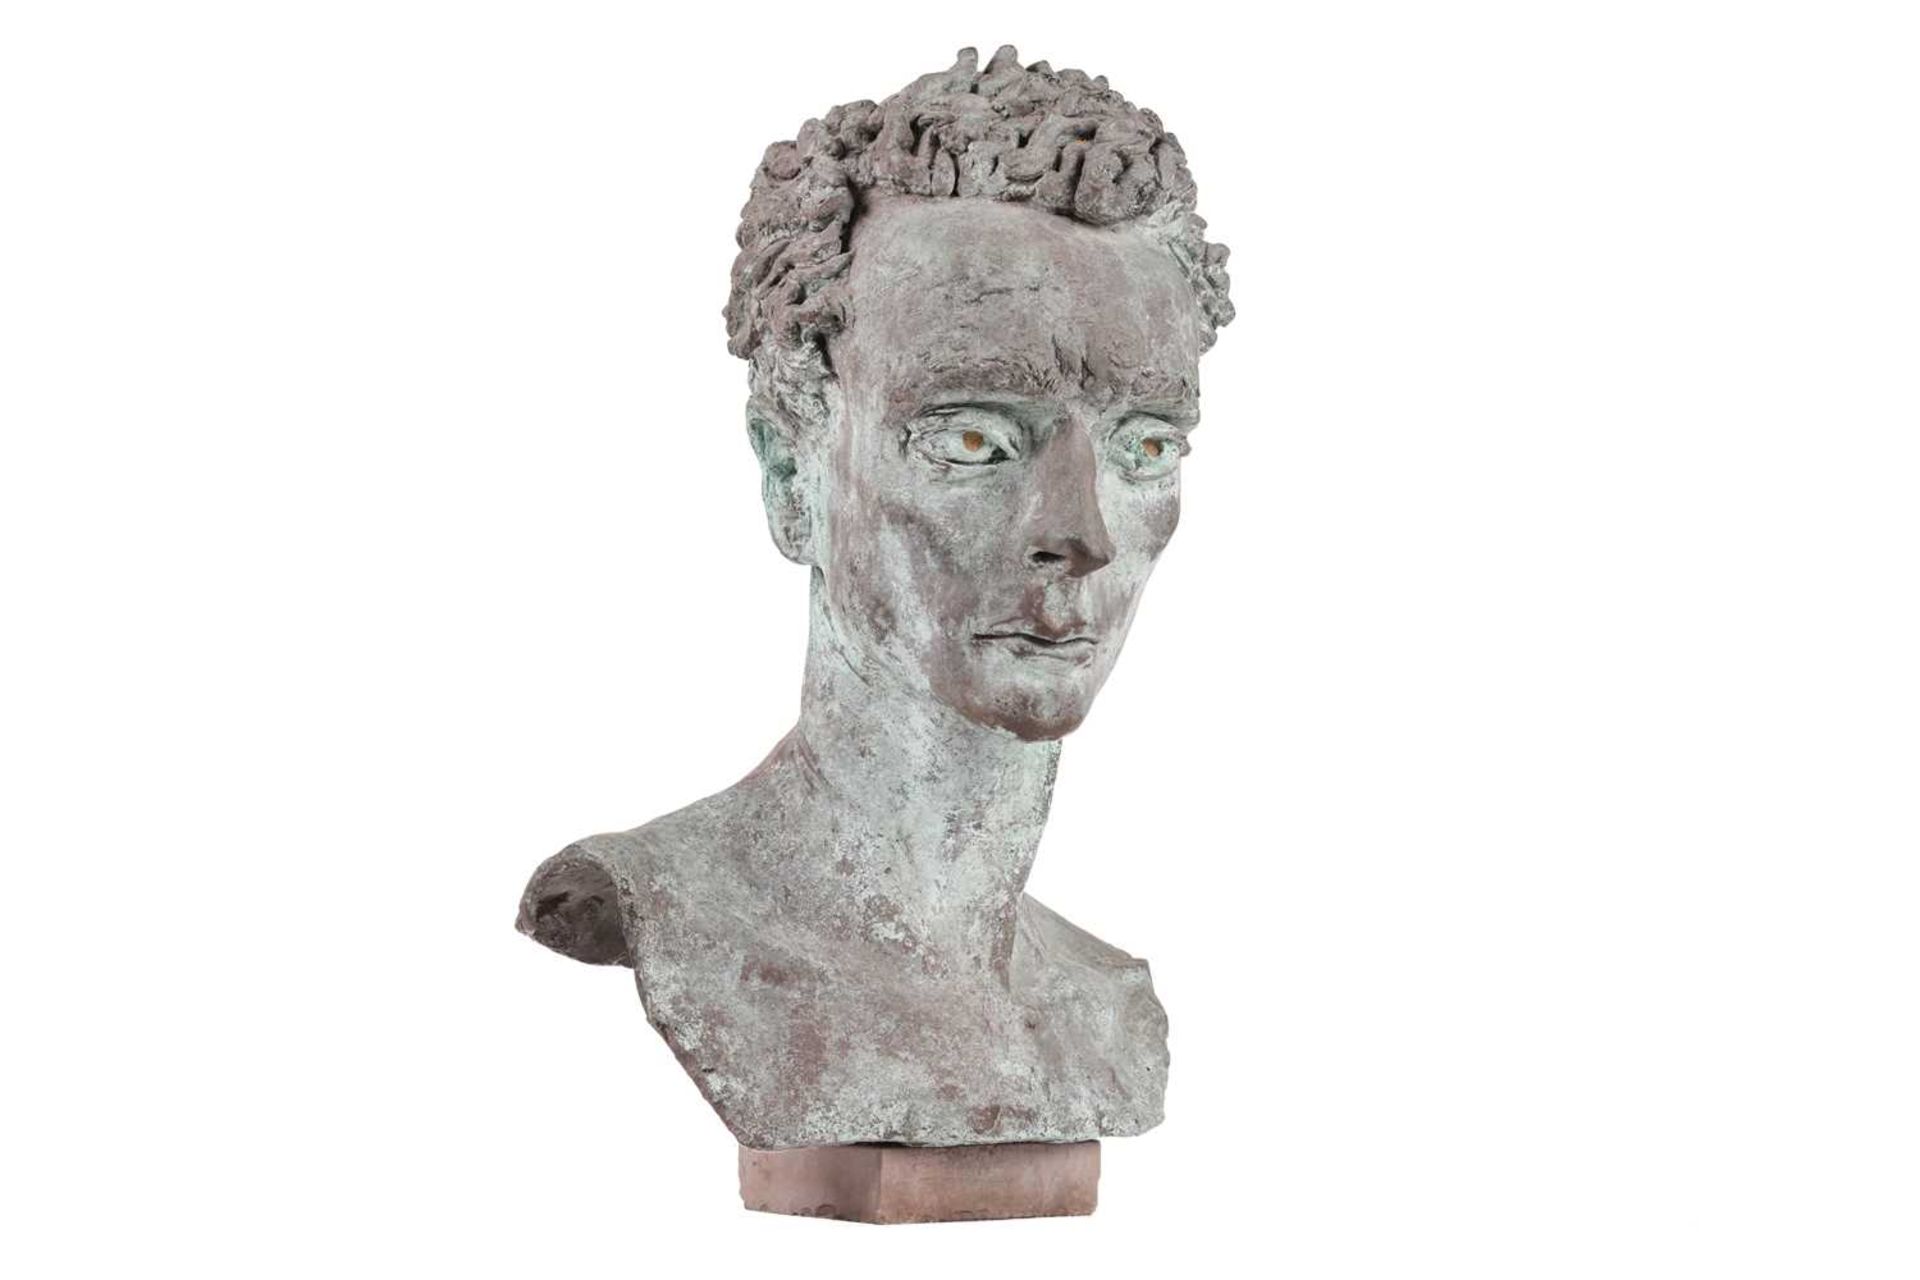 Sir Jacob Epstein (1880-1959), Bust of The Honourable Wynne Godley, green patinated bronze, 52 cm hi